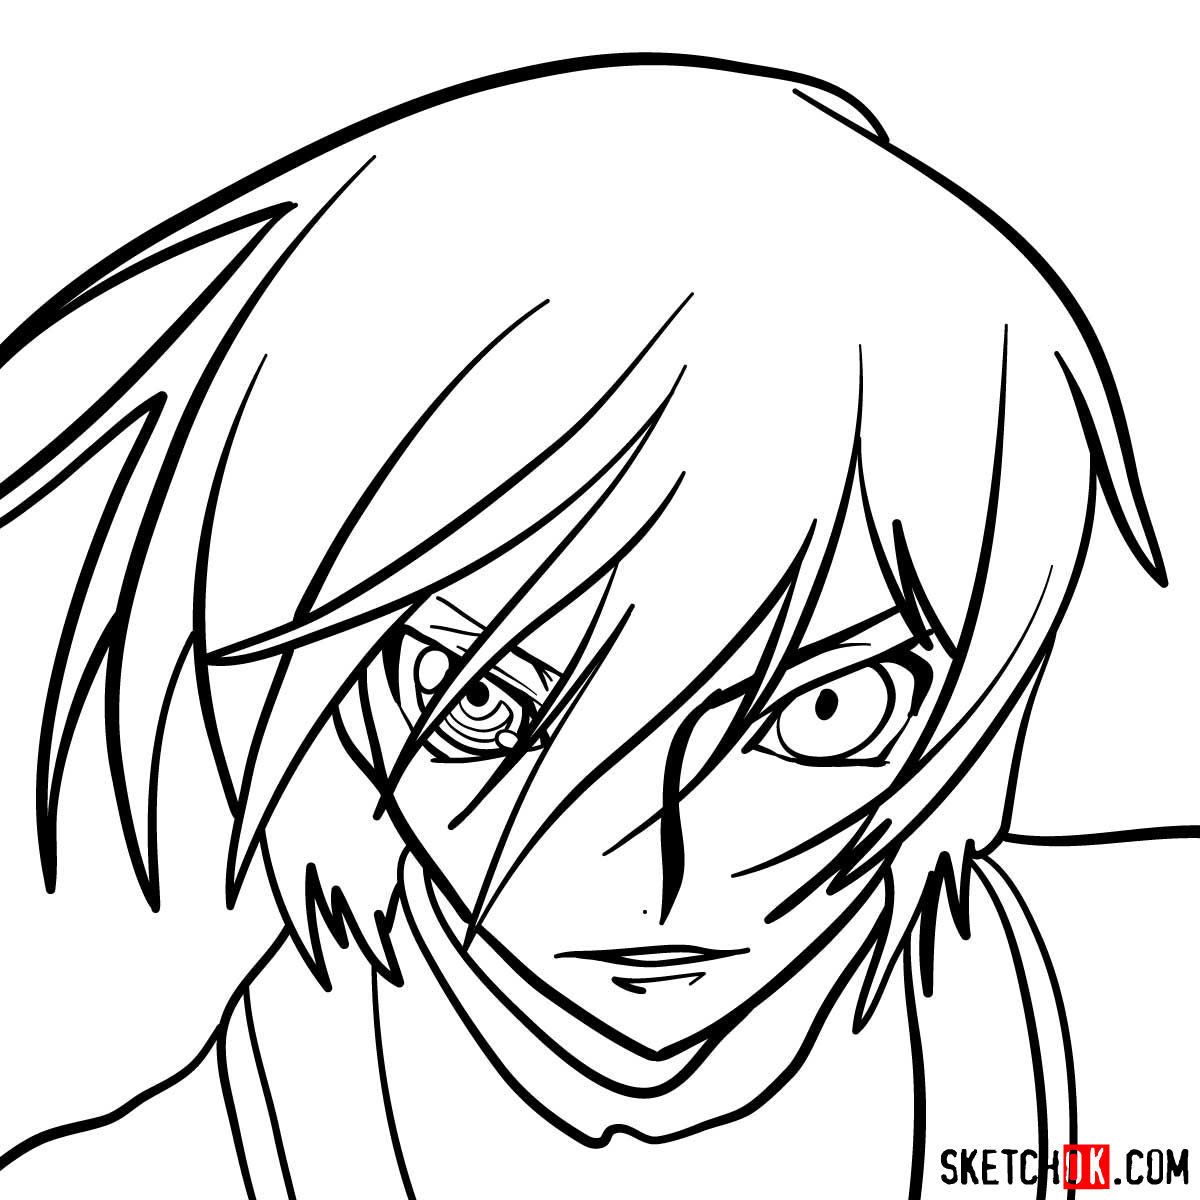 How to draw the face of Lelouch vi Britannia | Code Geass anime - step 08